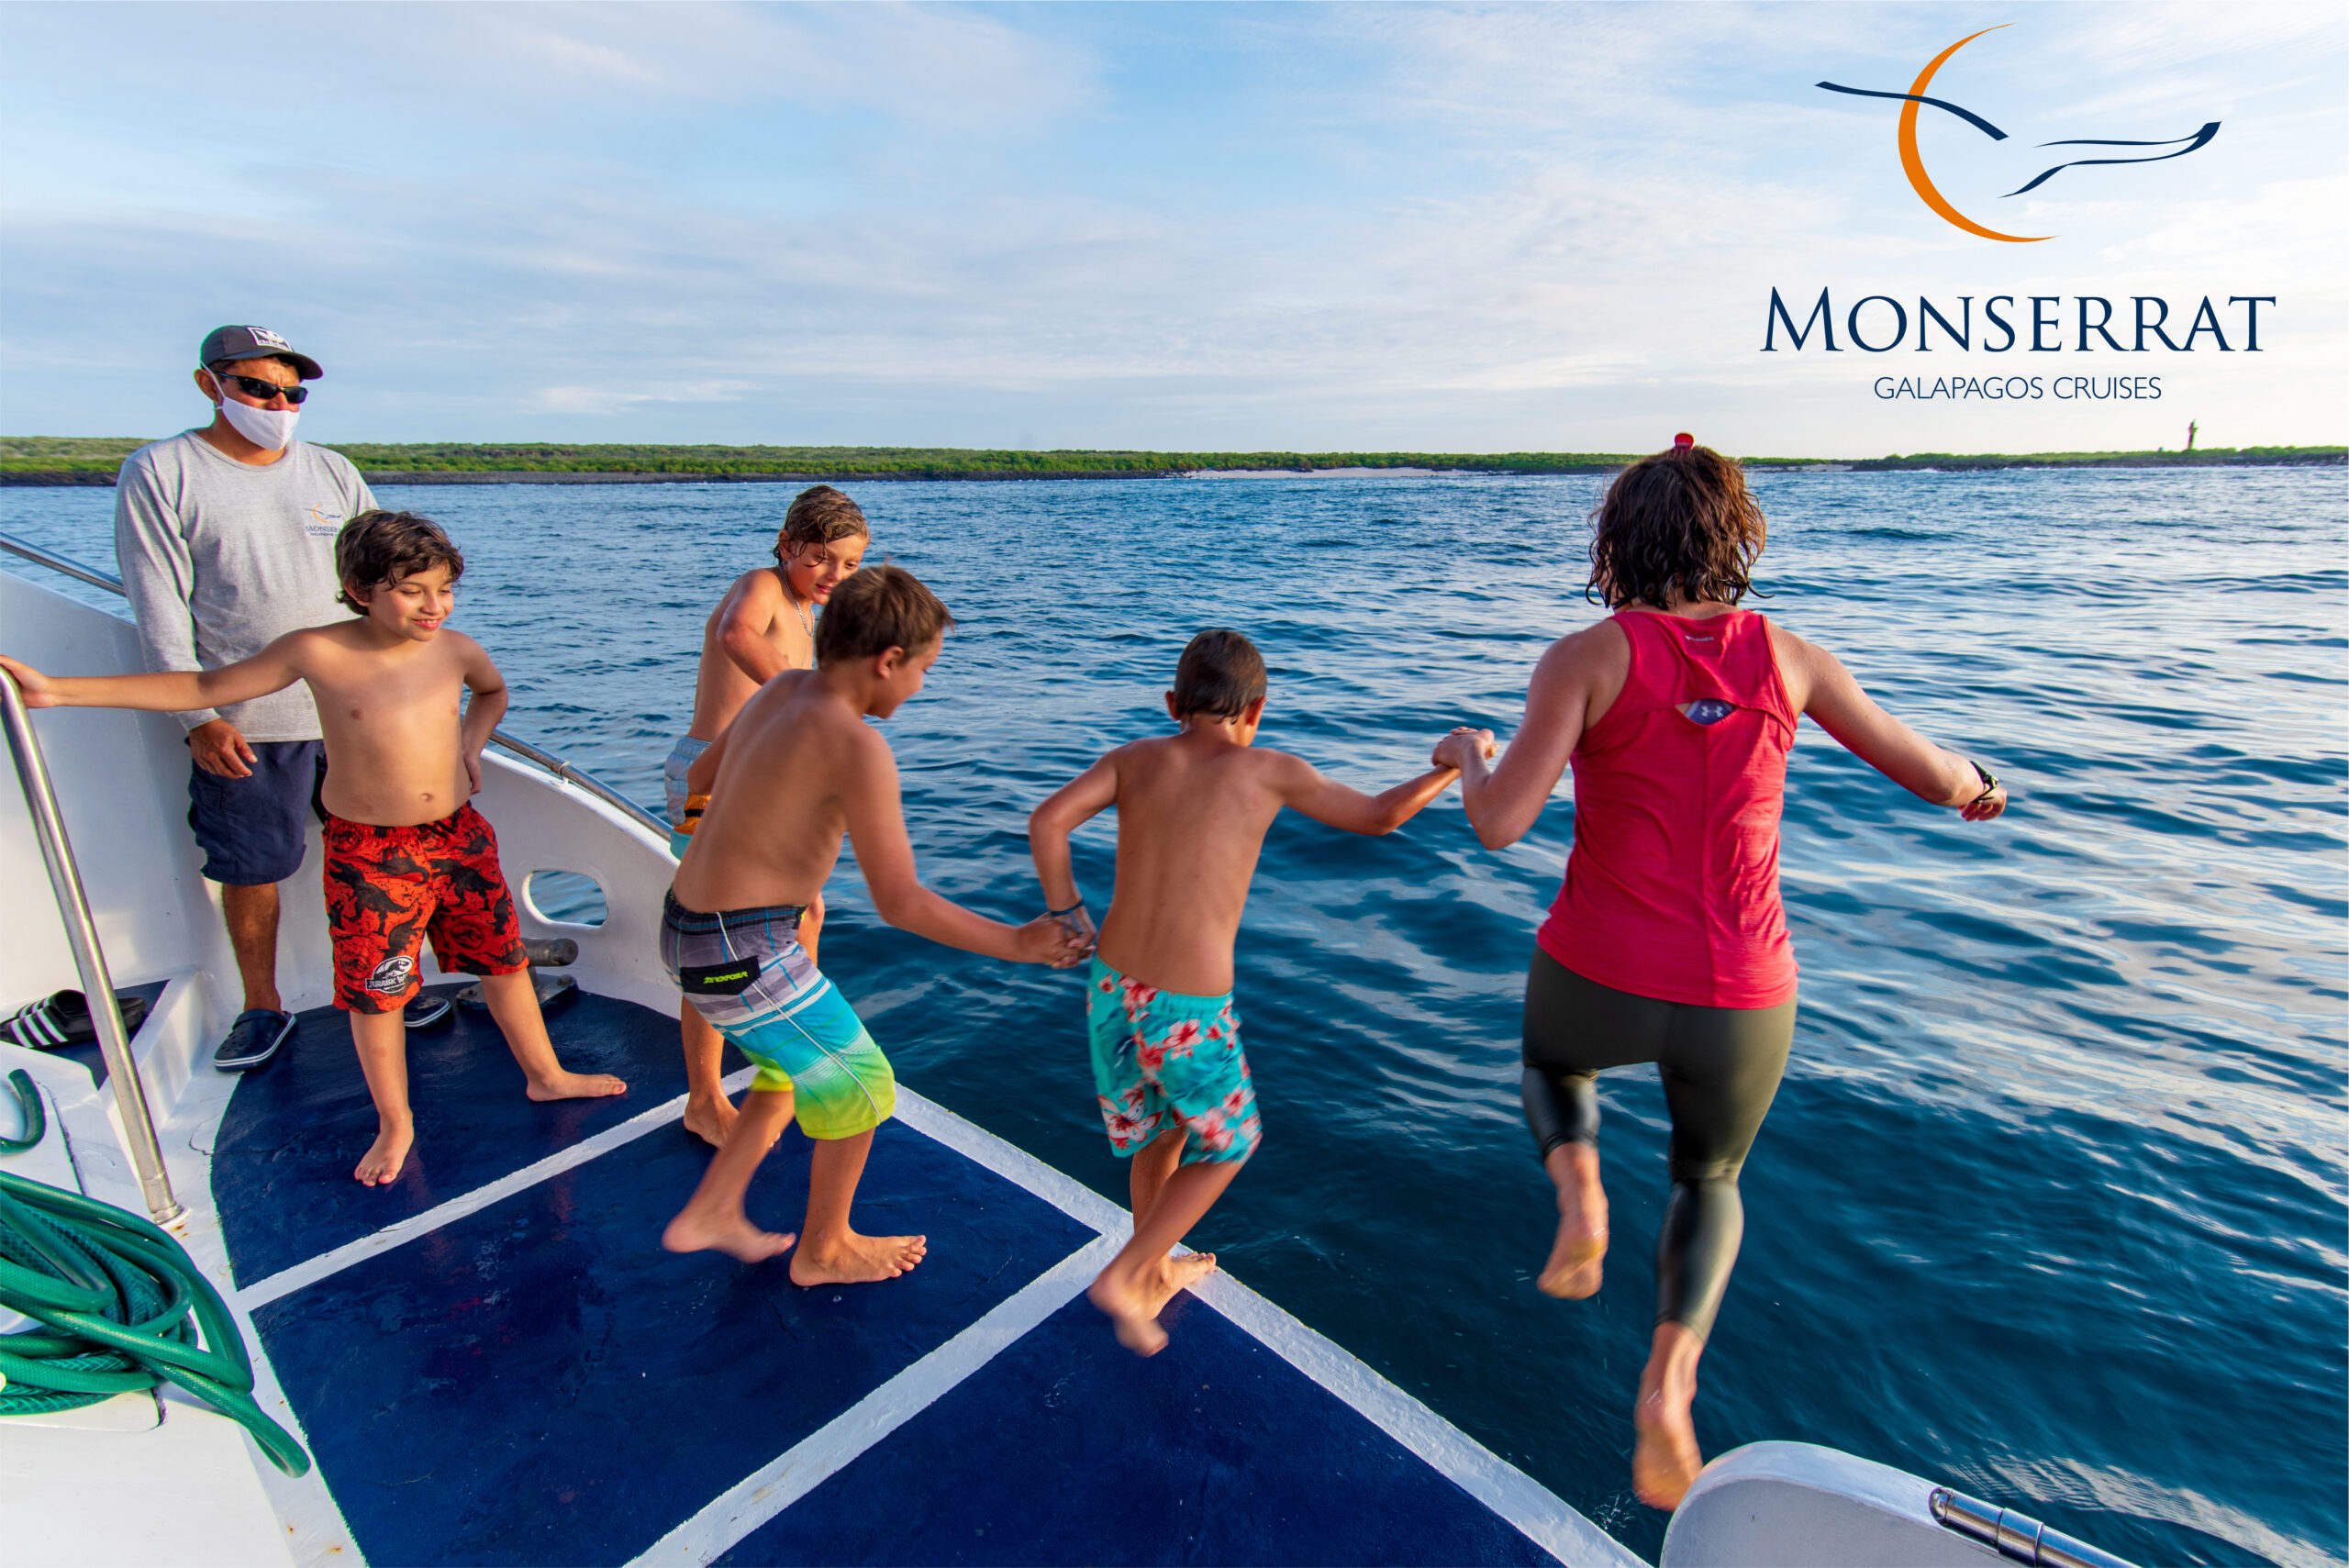 Monserrat Galapagos Cruises Guest Experience Families 10 High Res scaled